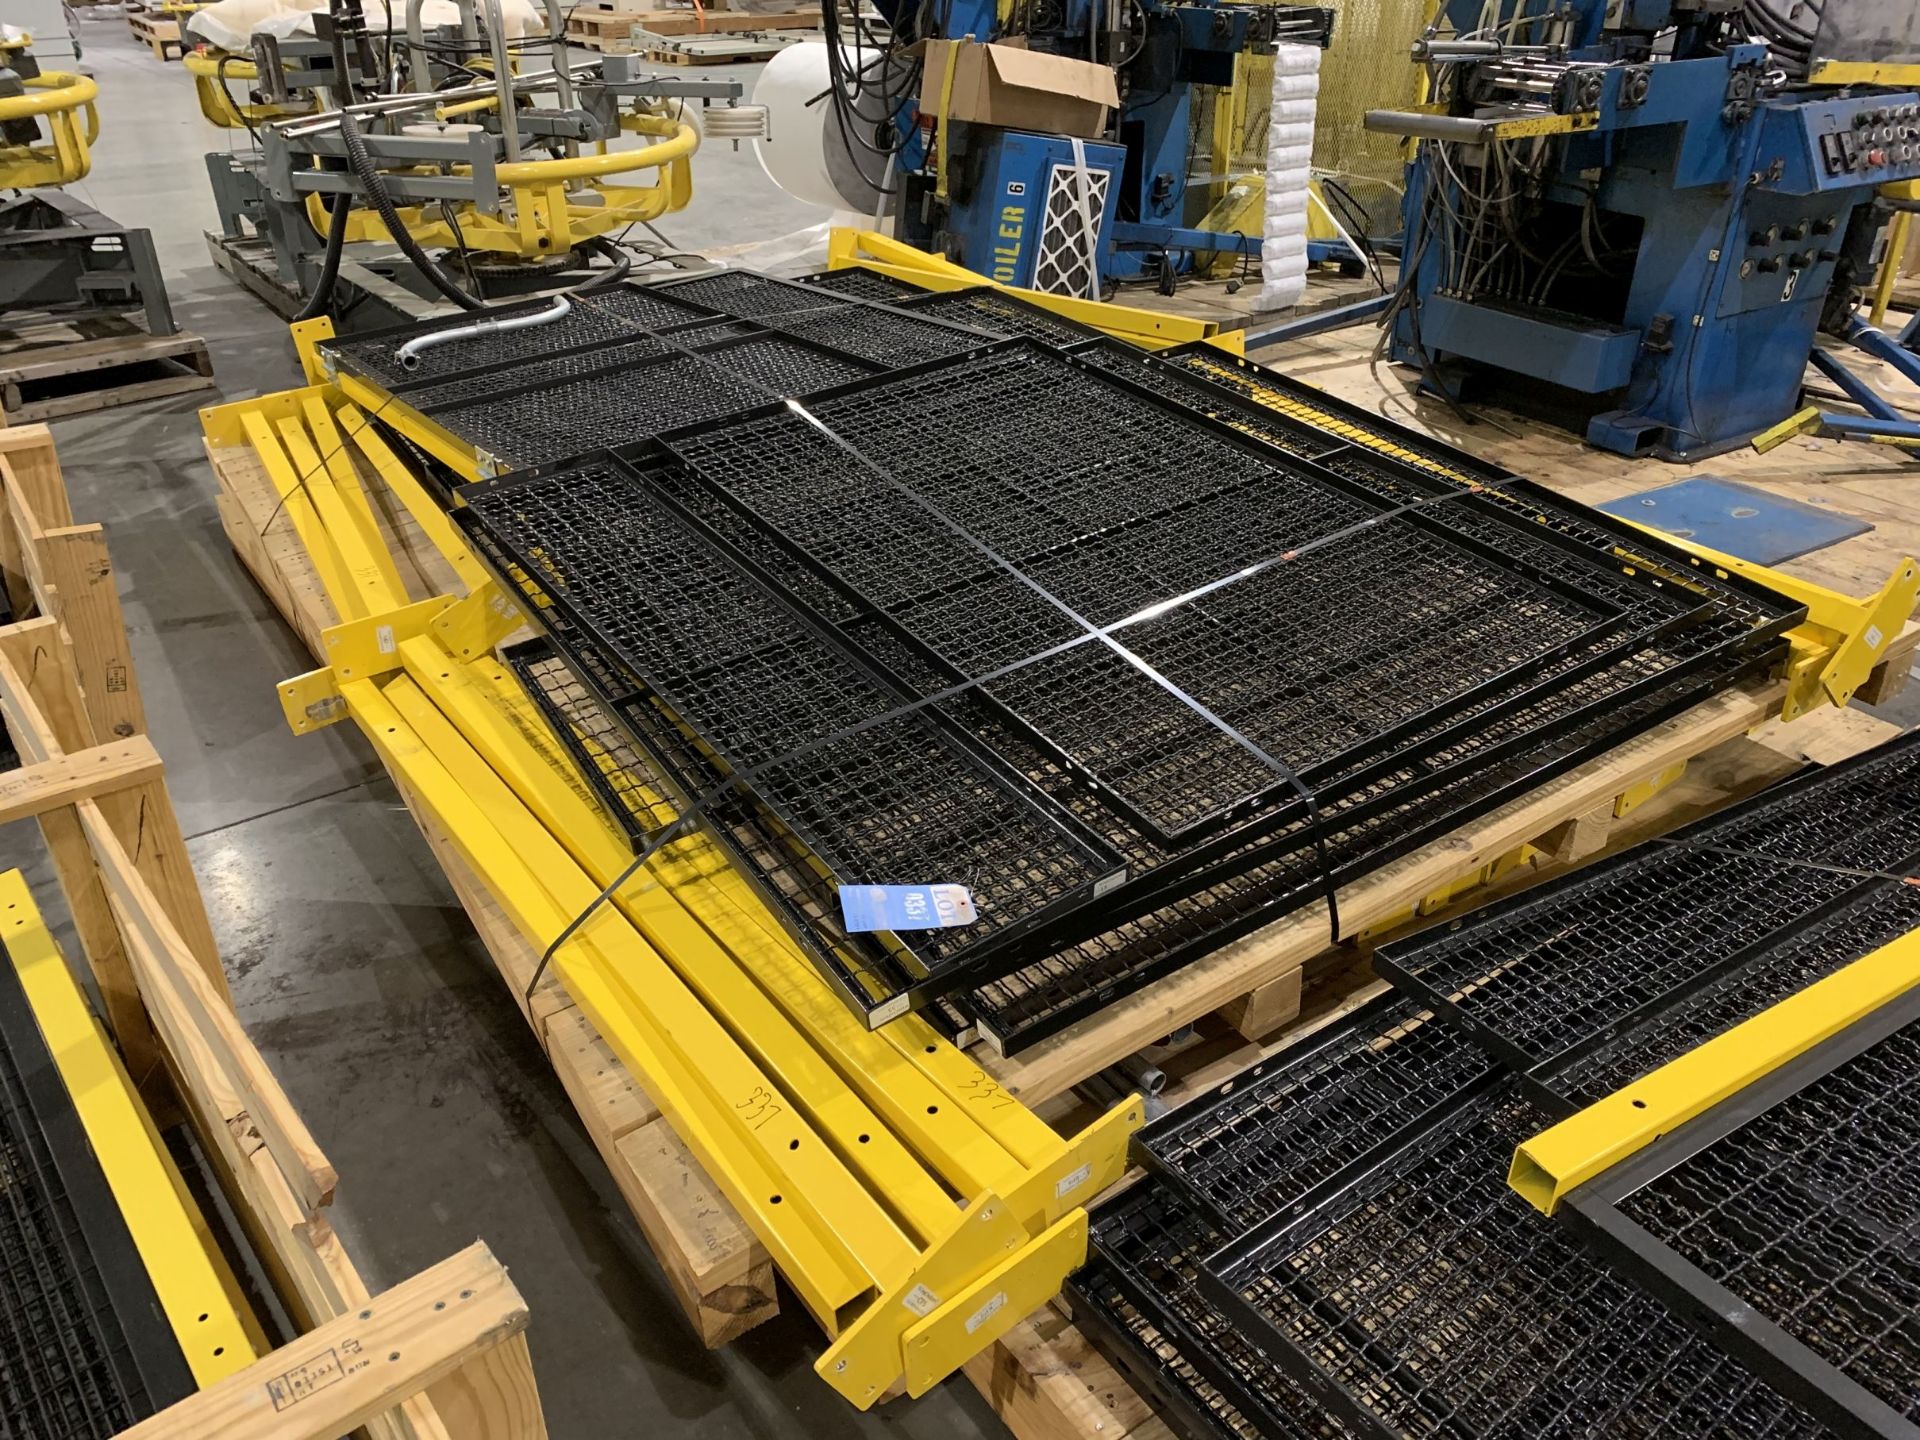 (LOT) ROBOT SAFETY CAGE ITEMS ((8) 60" X 48" PANELS & (16) YELLOW LEGS)